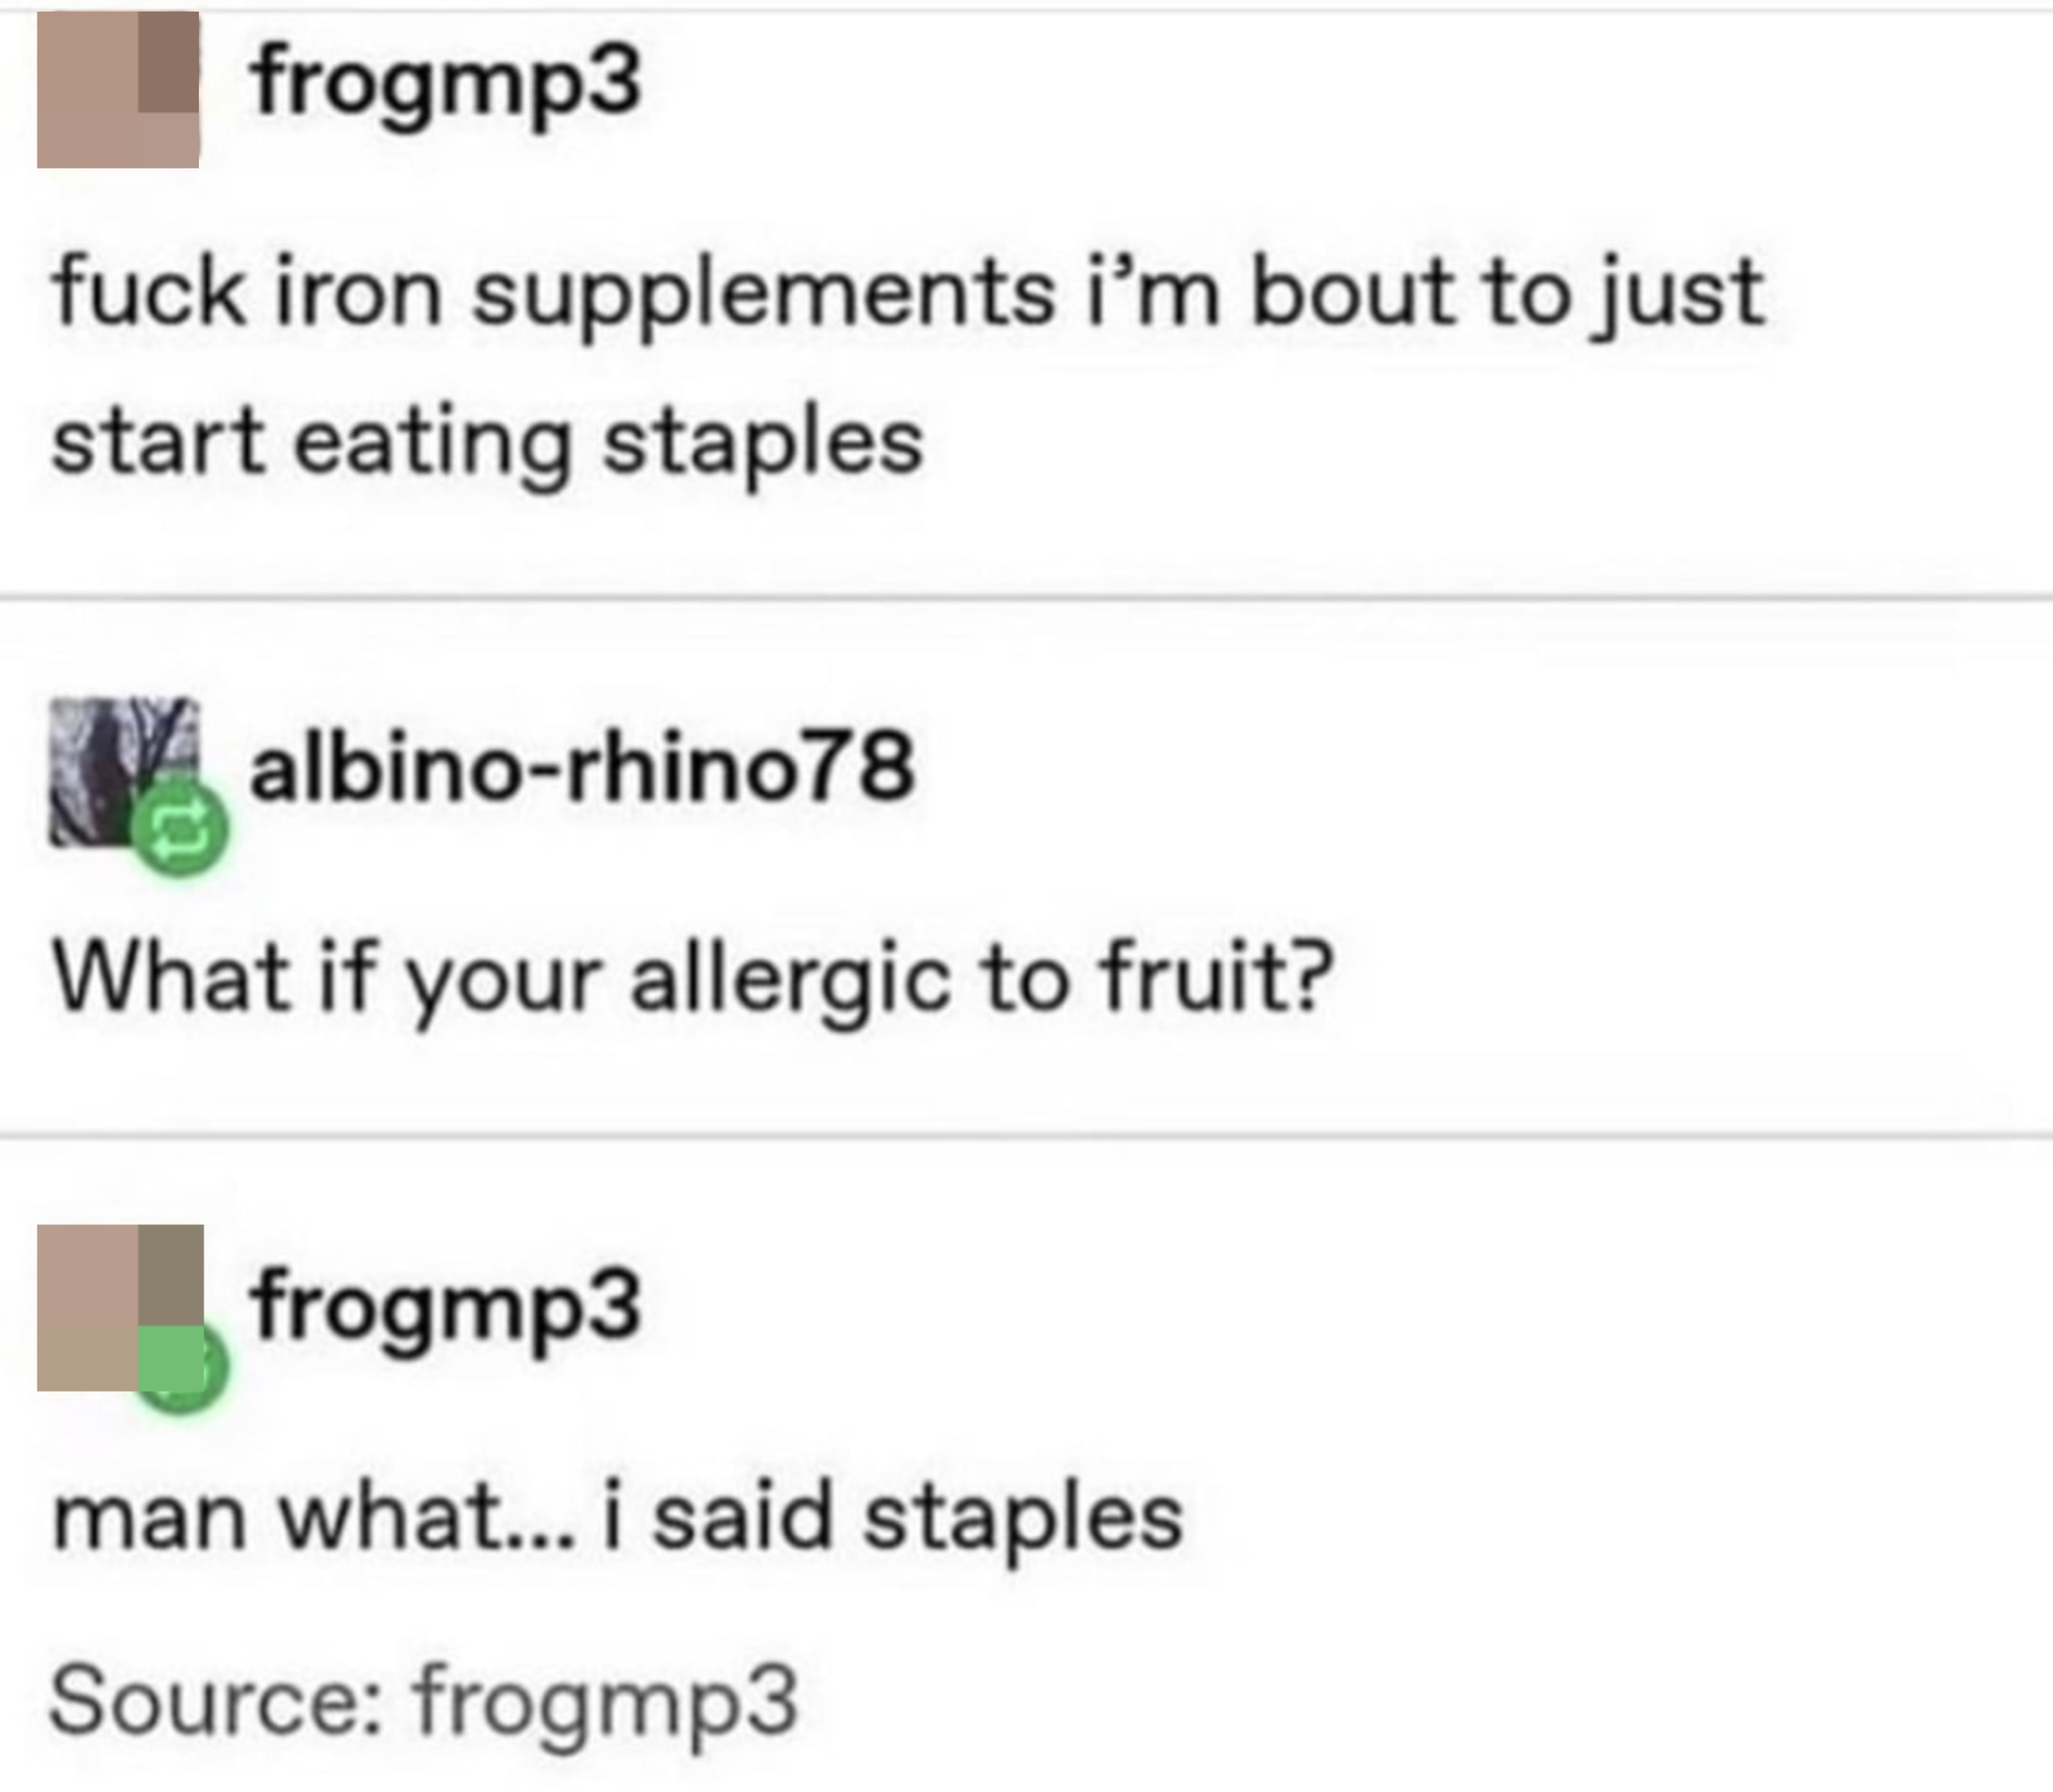 &quot;Fuck iron supplements i&#x27;m bout to just start eating staples&quot;; &quot;What if your allergic to fruit?&quot; &quot;man what... i said staples&quot;